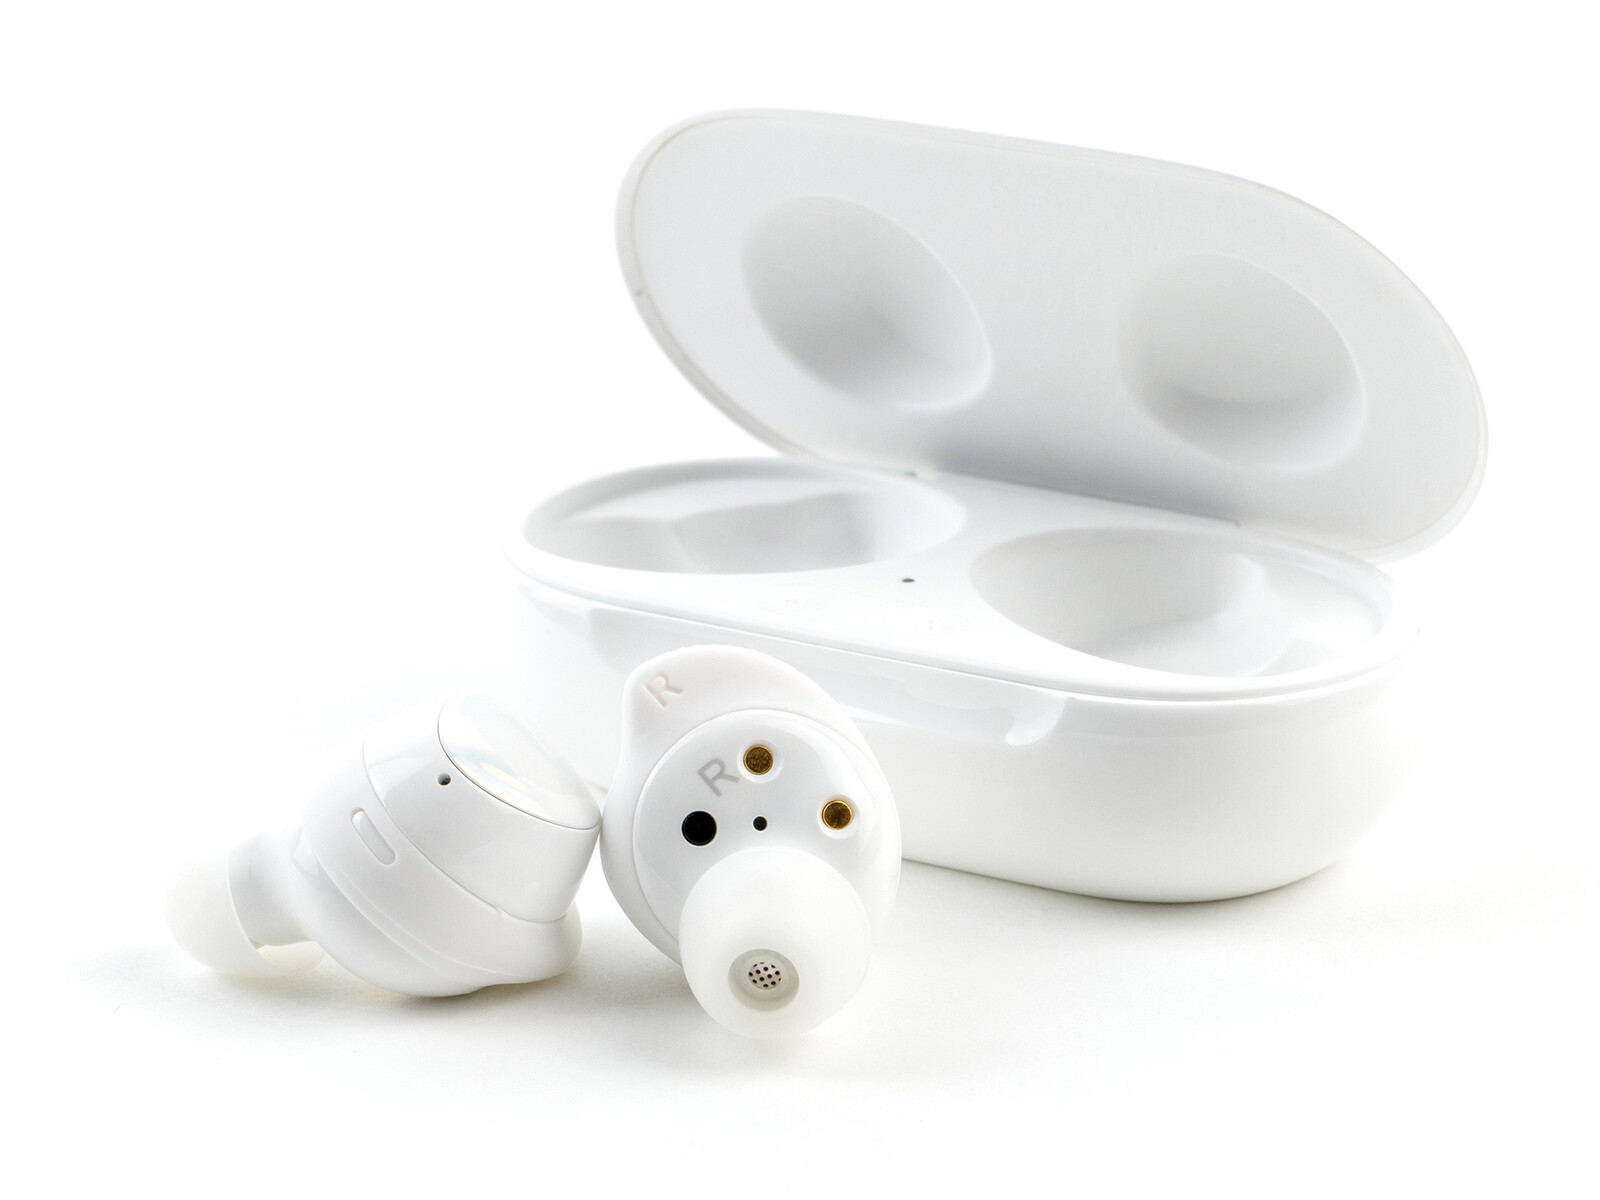 Samsung Galaxy Buds Plus Review - TWS headset with great battery